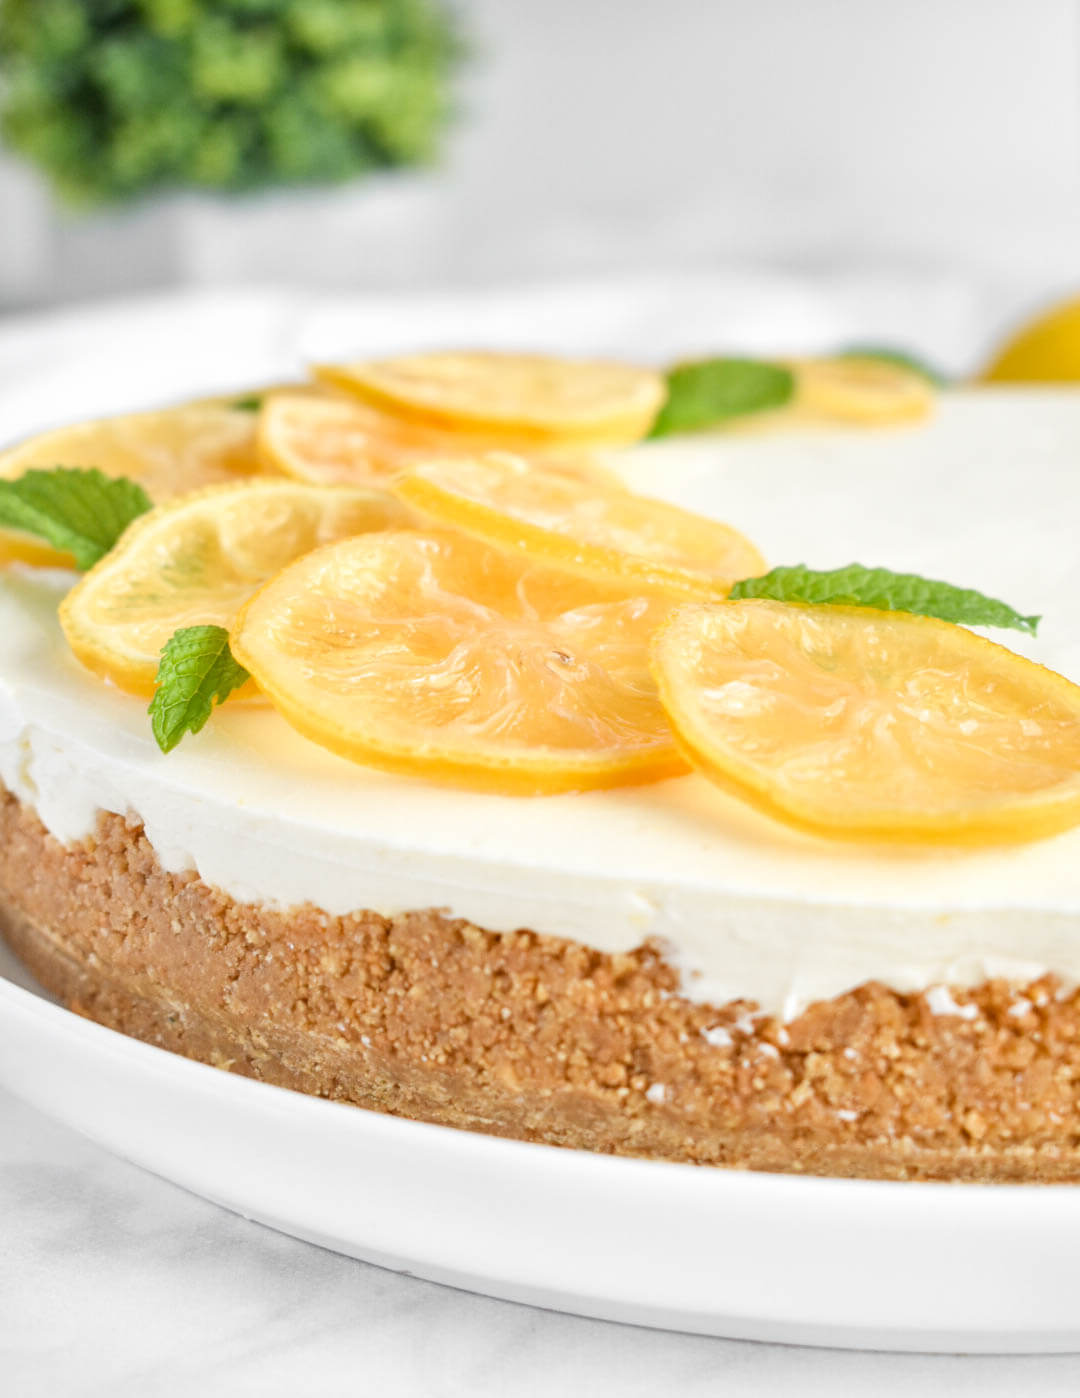 No Bake Lemon Cheesecake topped with candied lemon slices and mint leaves.